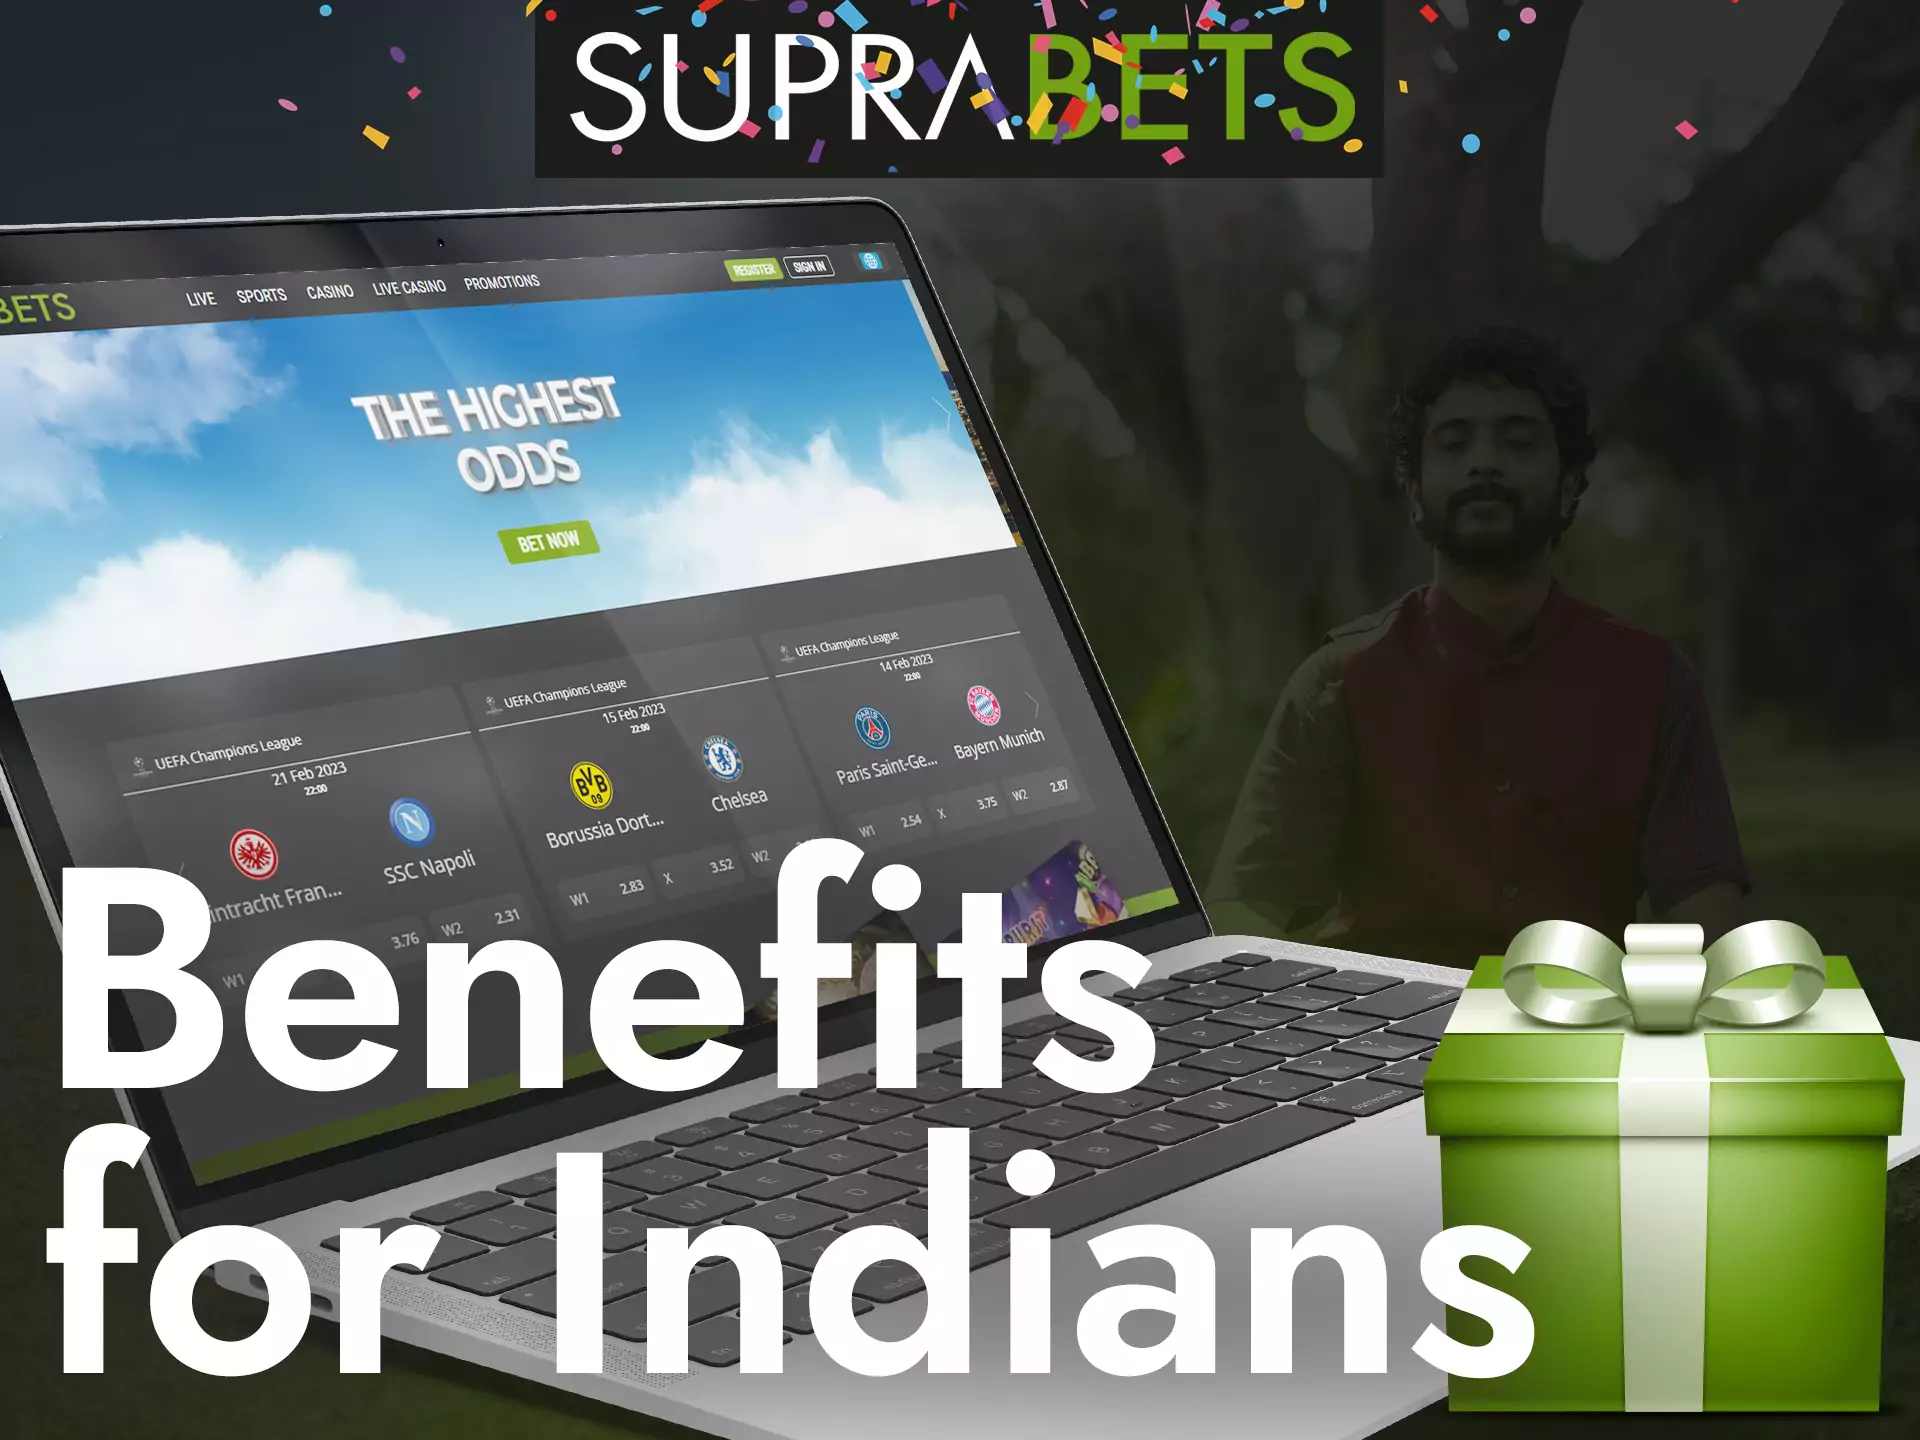 Find out about all the benefits and bonuses for Indian players from Suprabets.